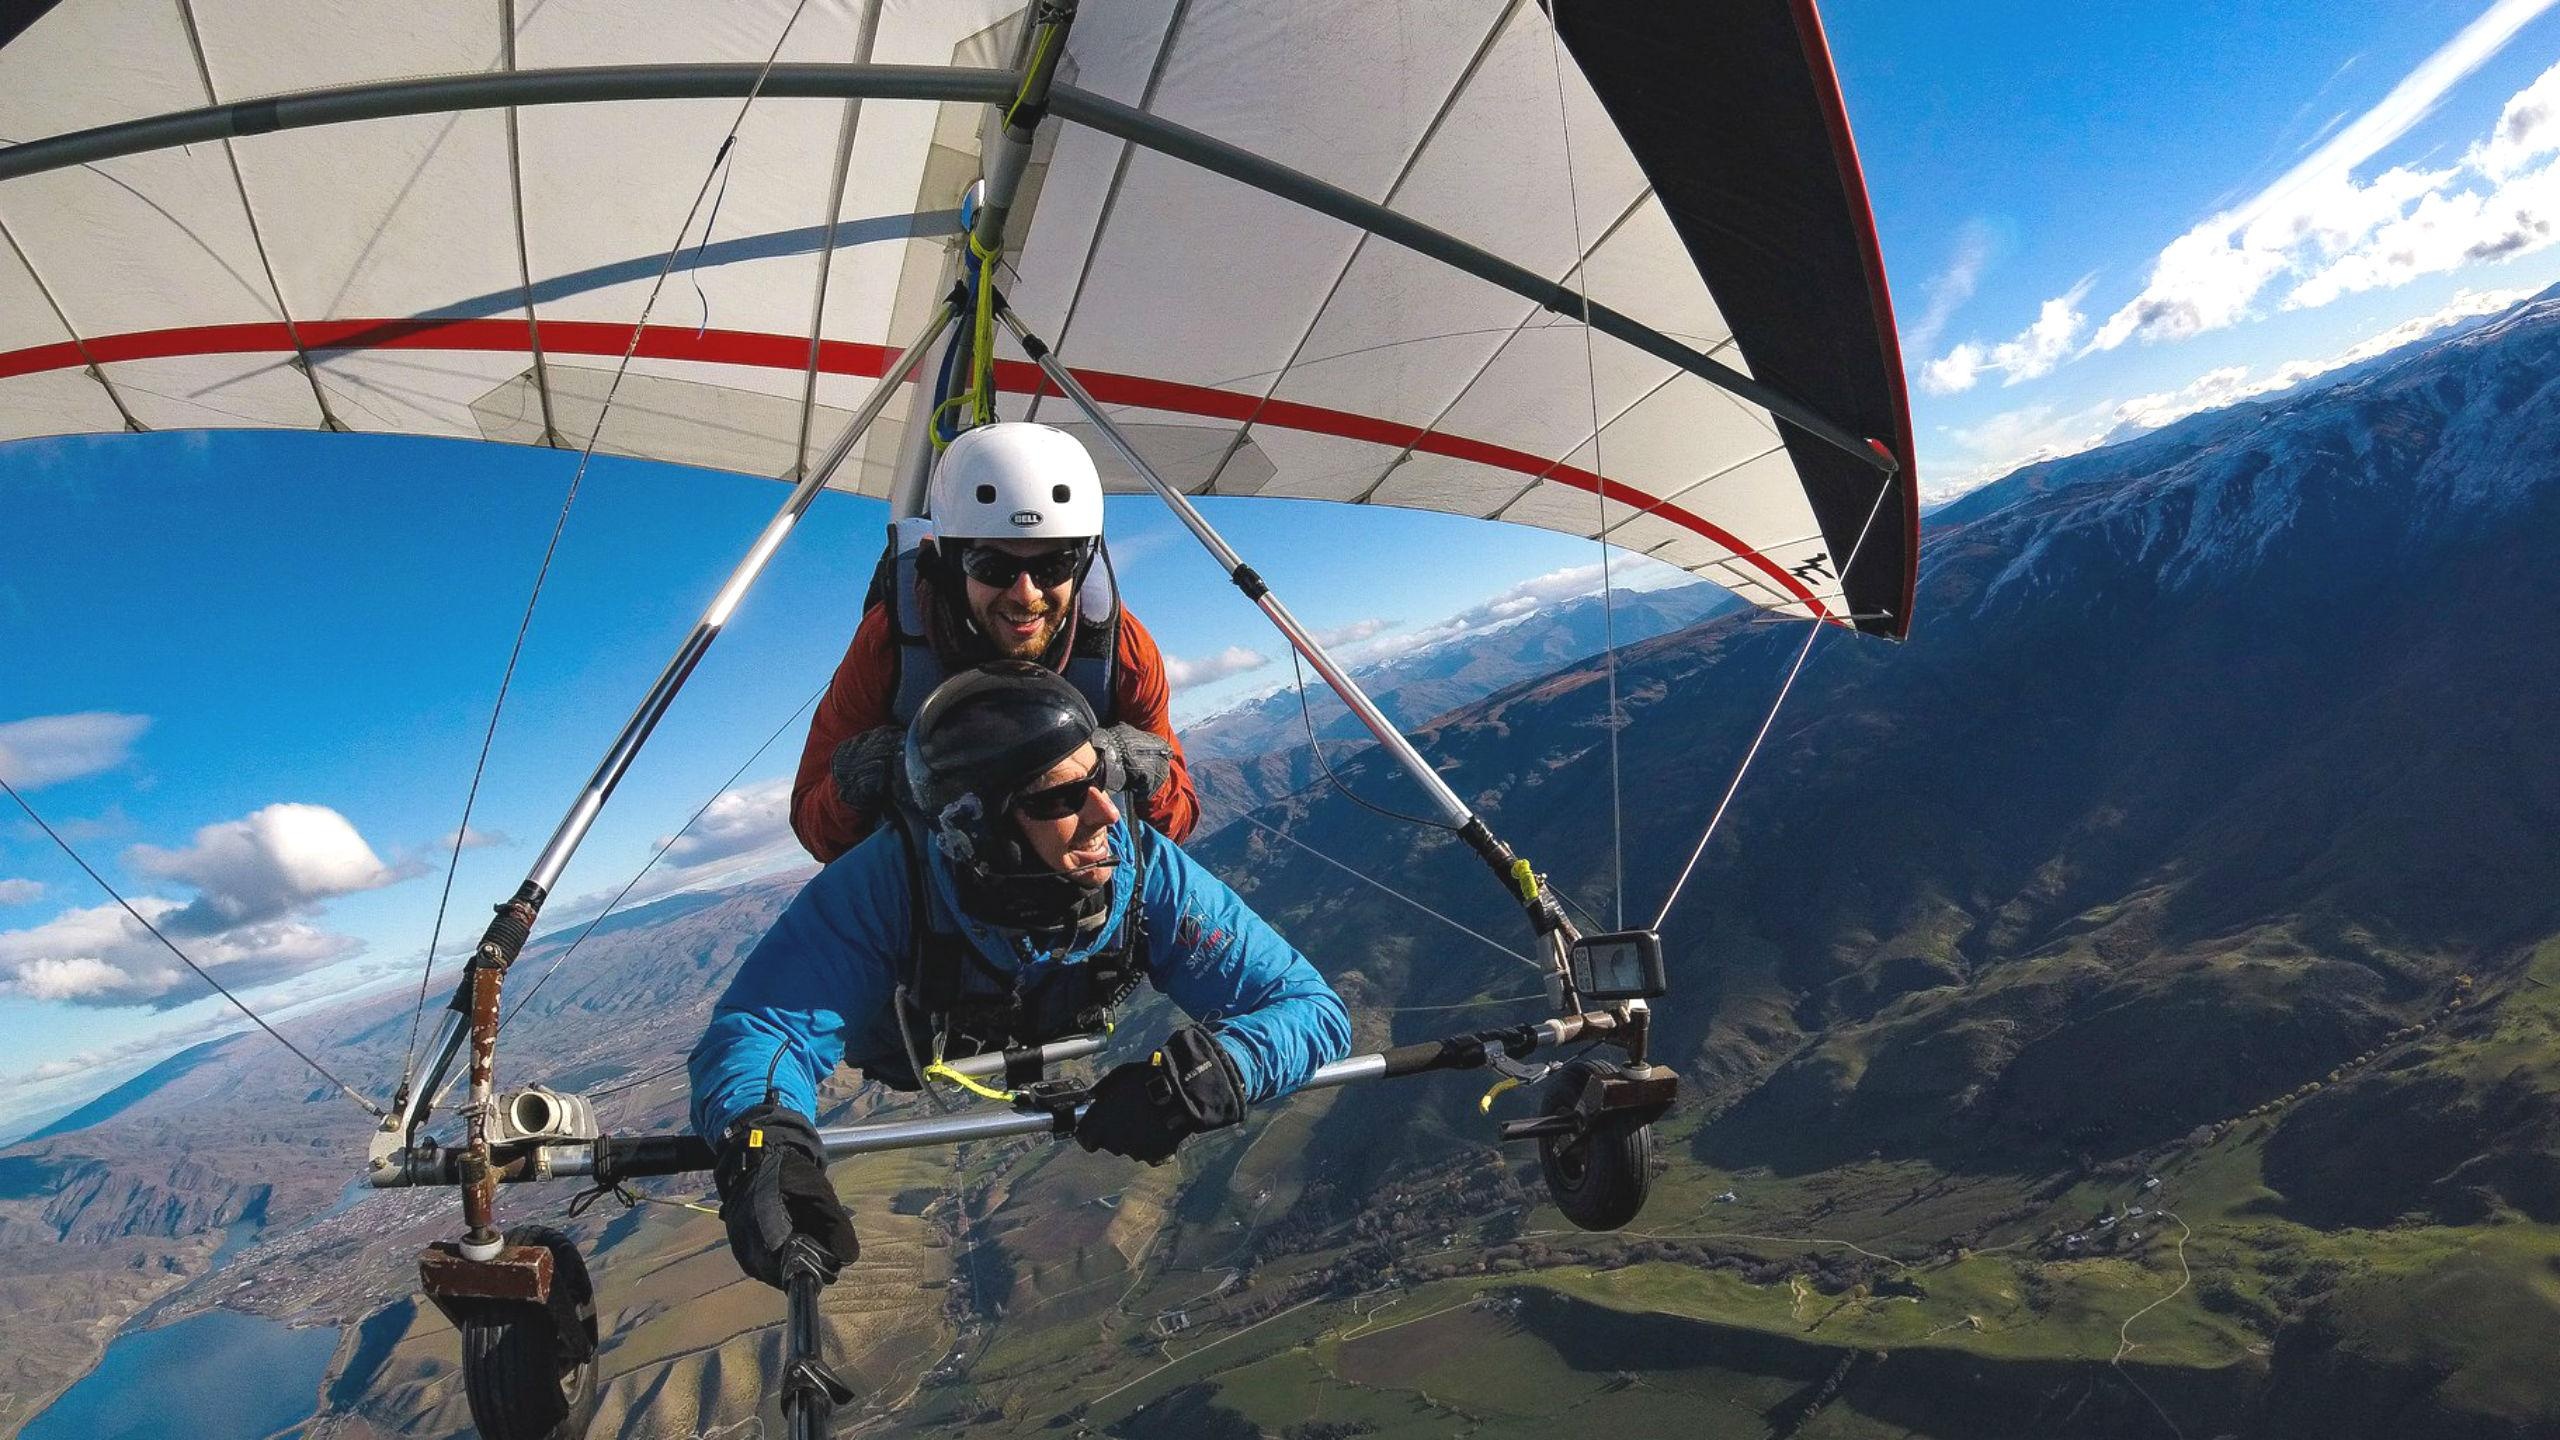 Hang Gliding: To tandem hang glide, Skytrek Queenstown, A foot-launched powered hang glider. 2560x1440 HD Wallpaper.